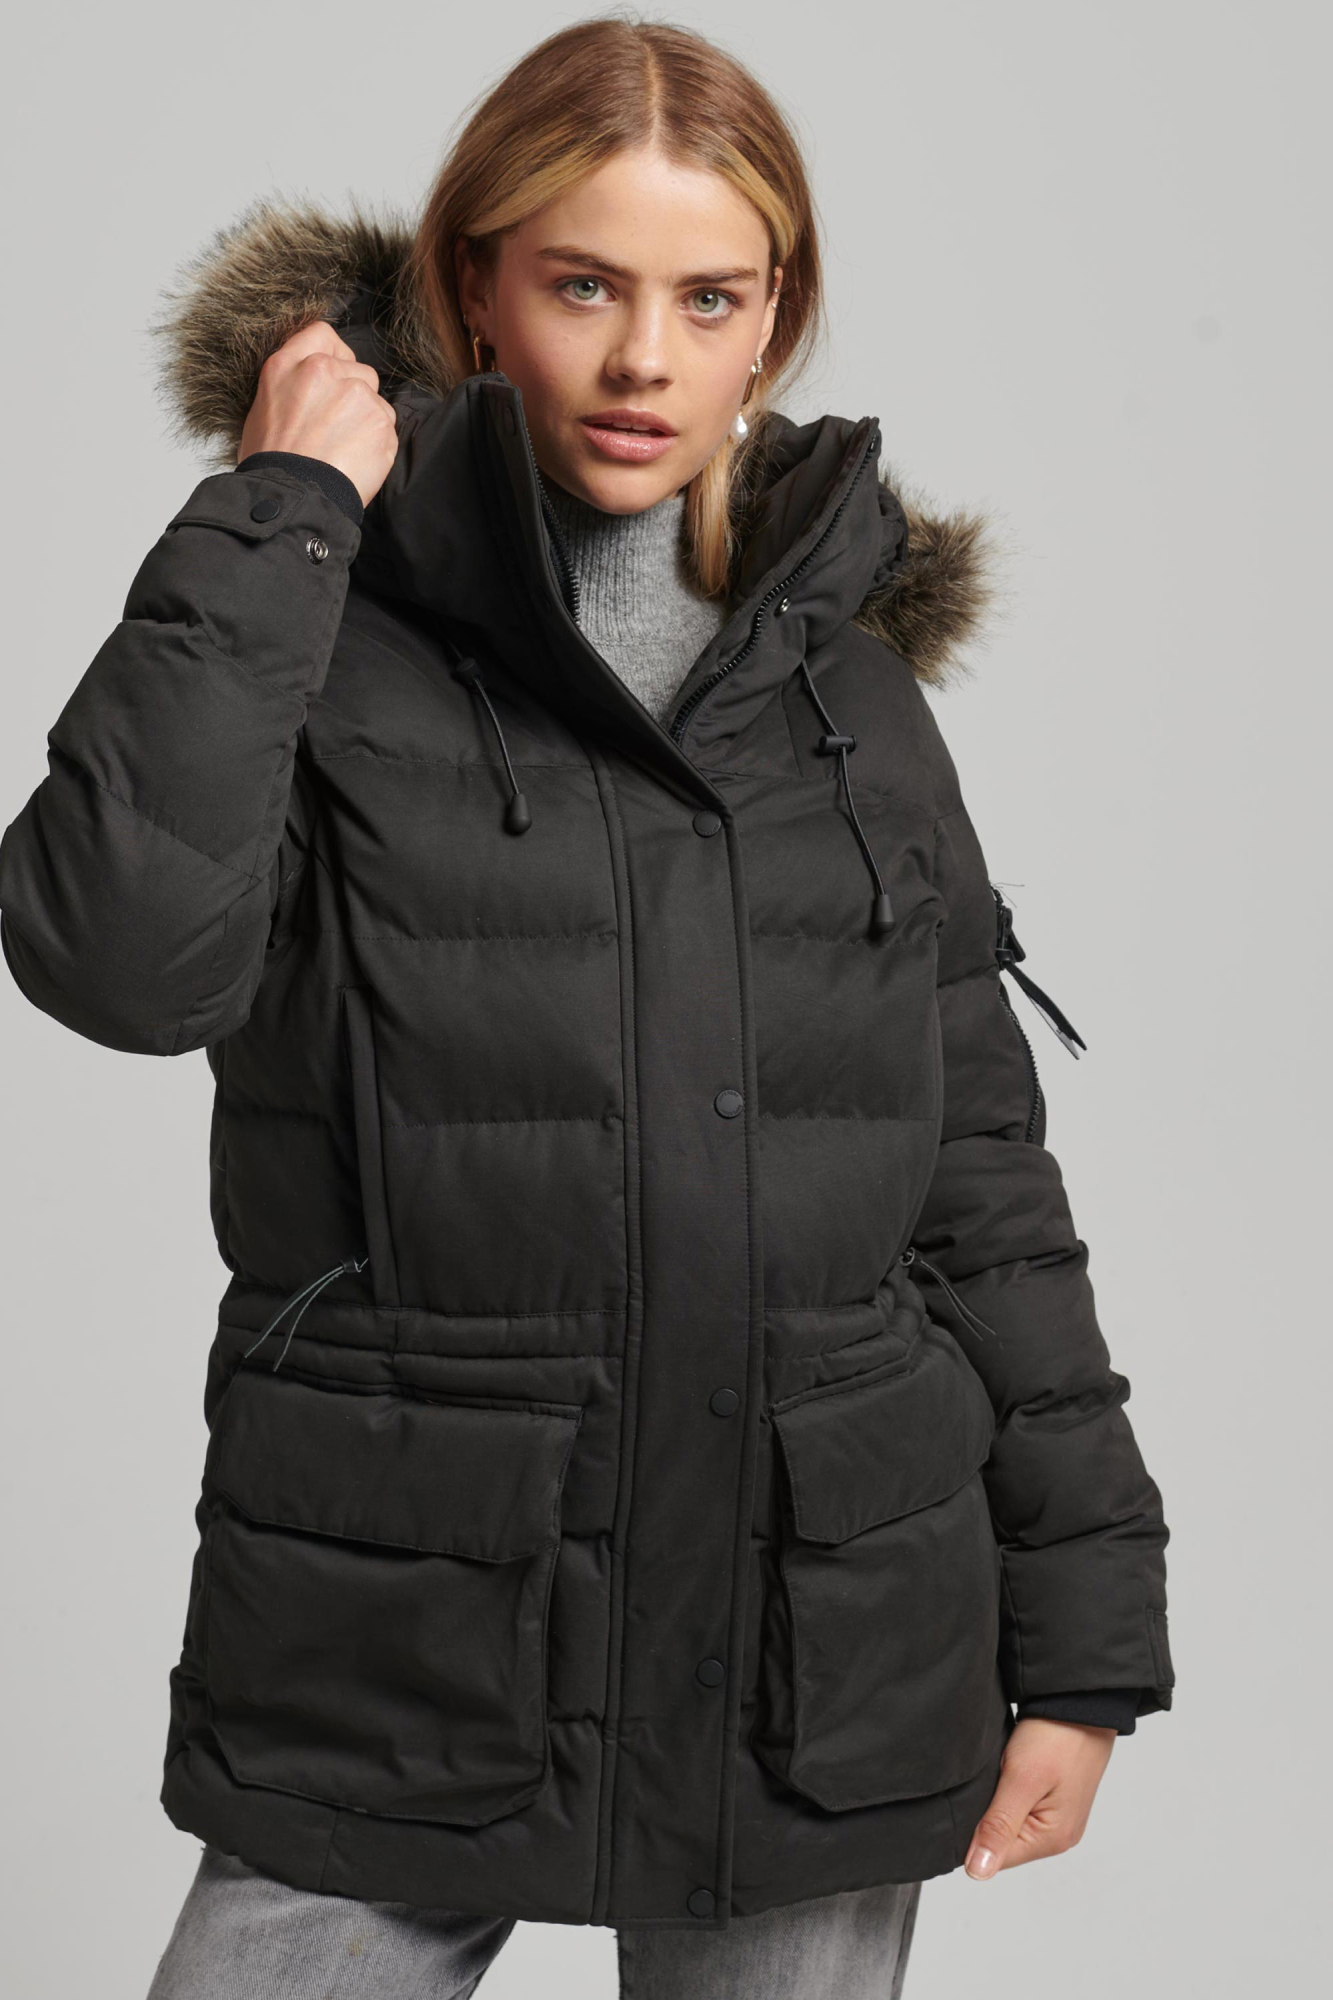 Superdry Womens Microfibre Expedition Parka Black - Size: 16